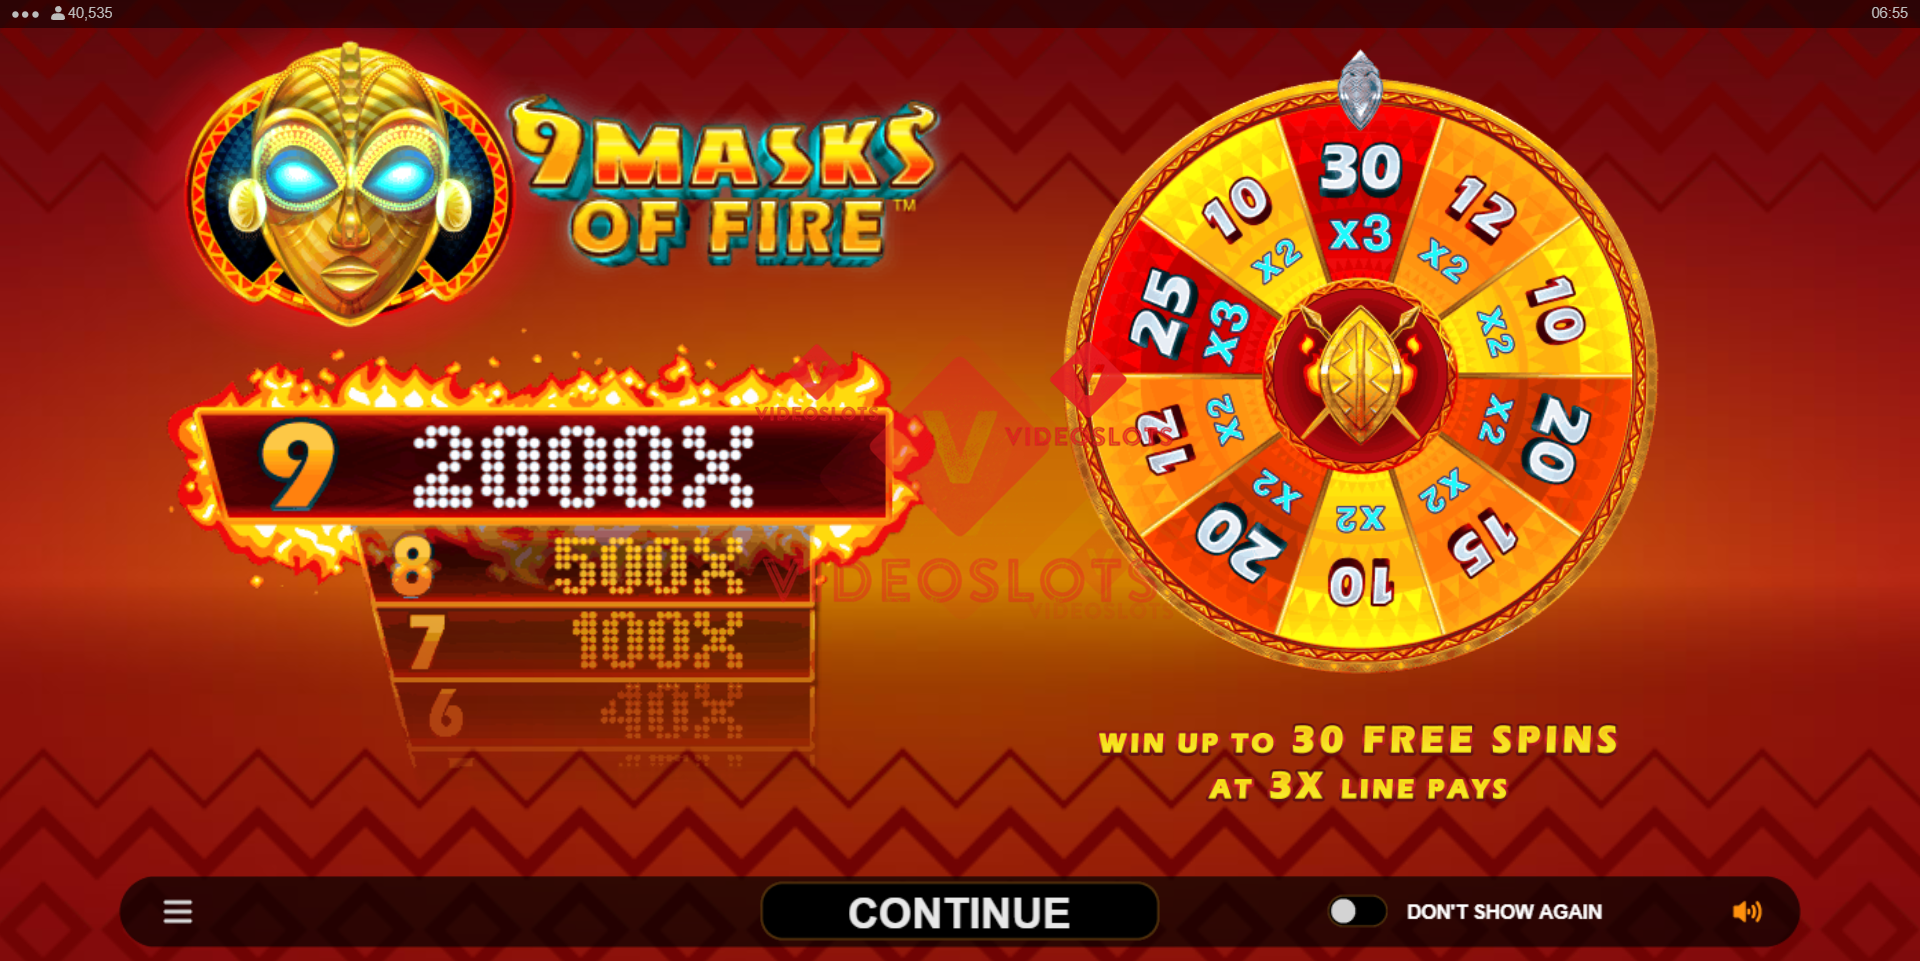 Game Intro for 9 Masks of Fire slot for Microgaming